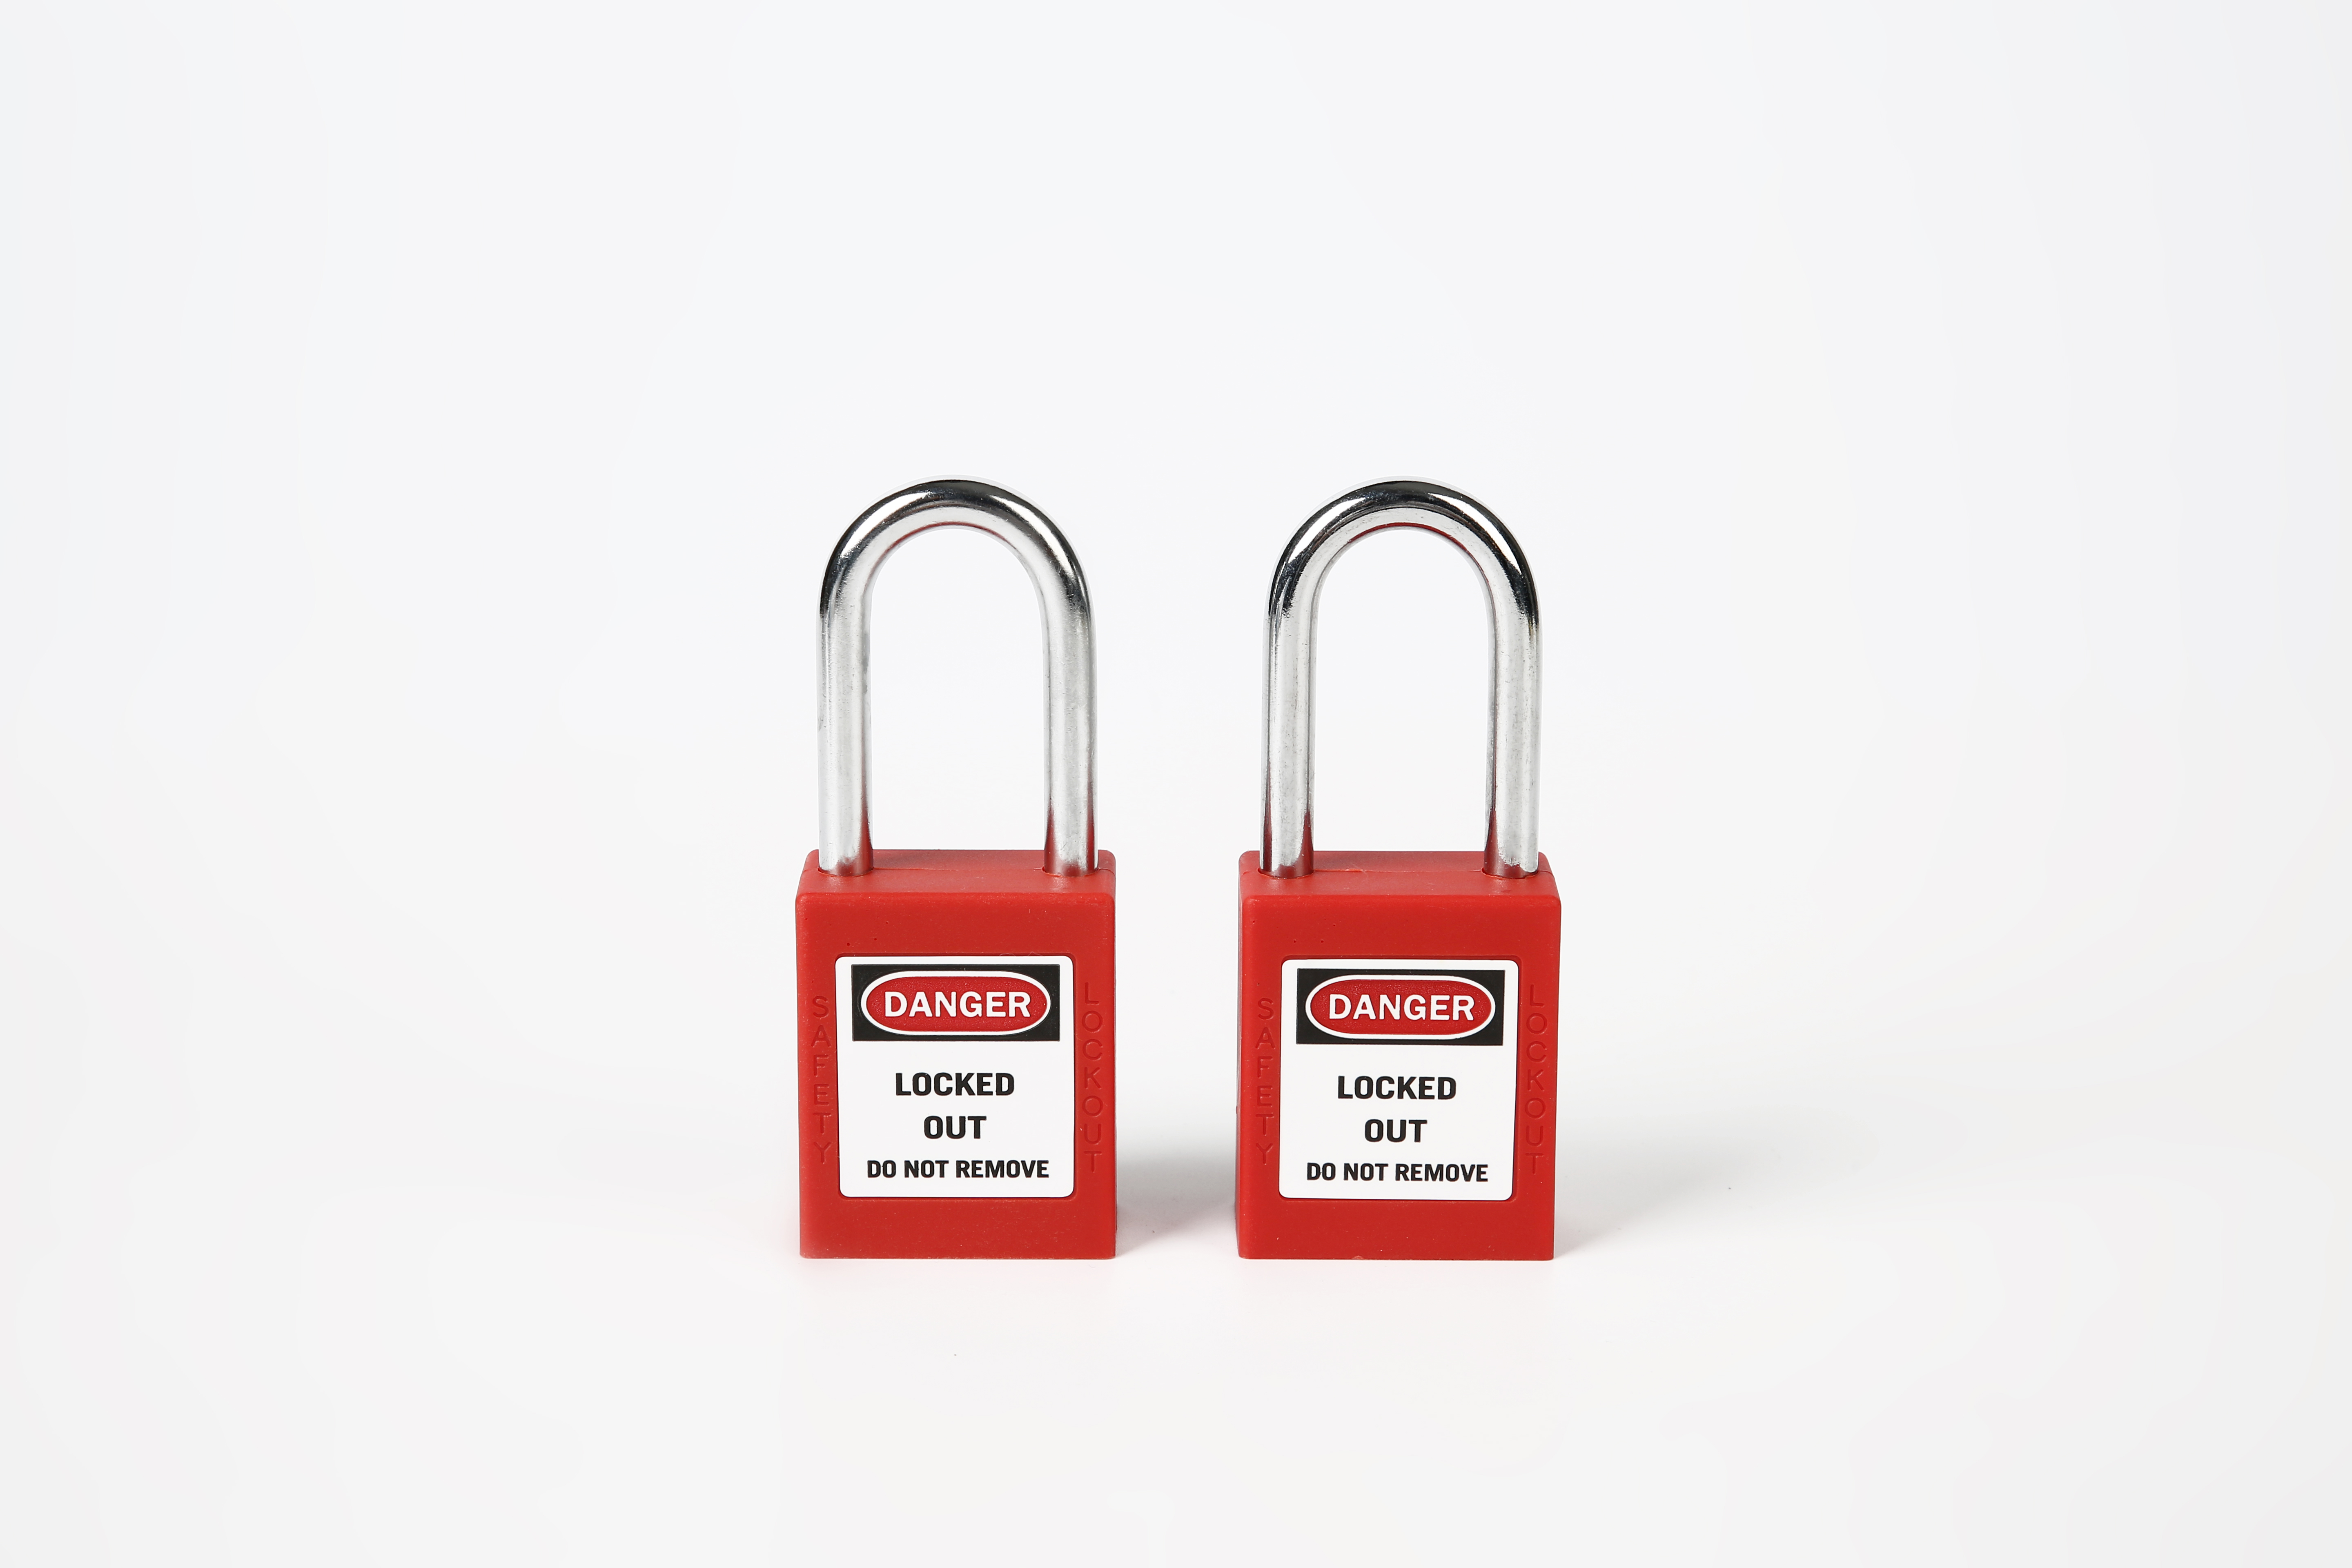 What are the factors that affect the quality of safety padlocks?